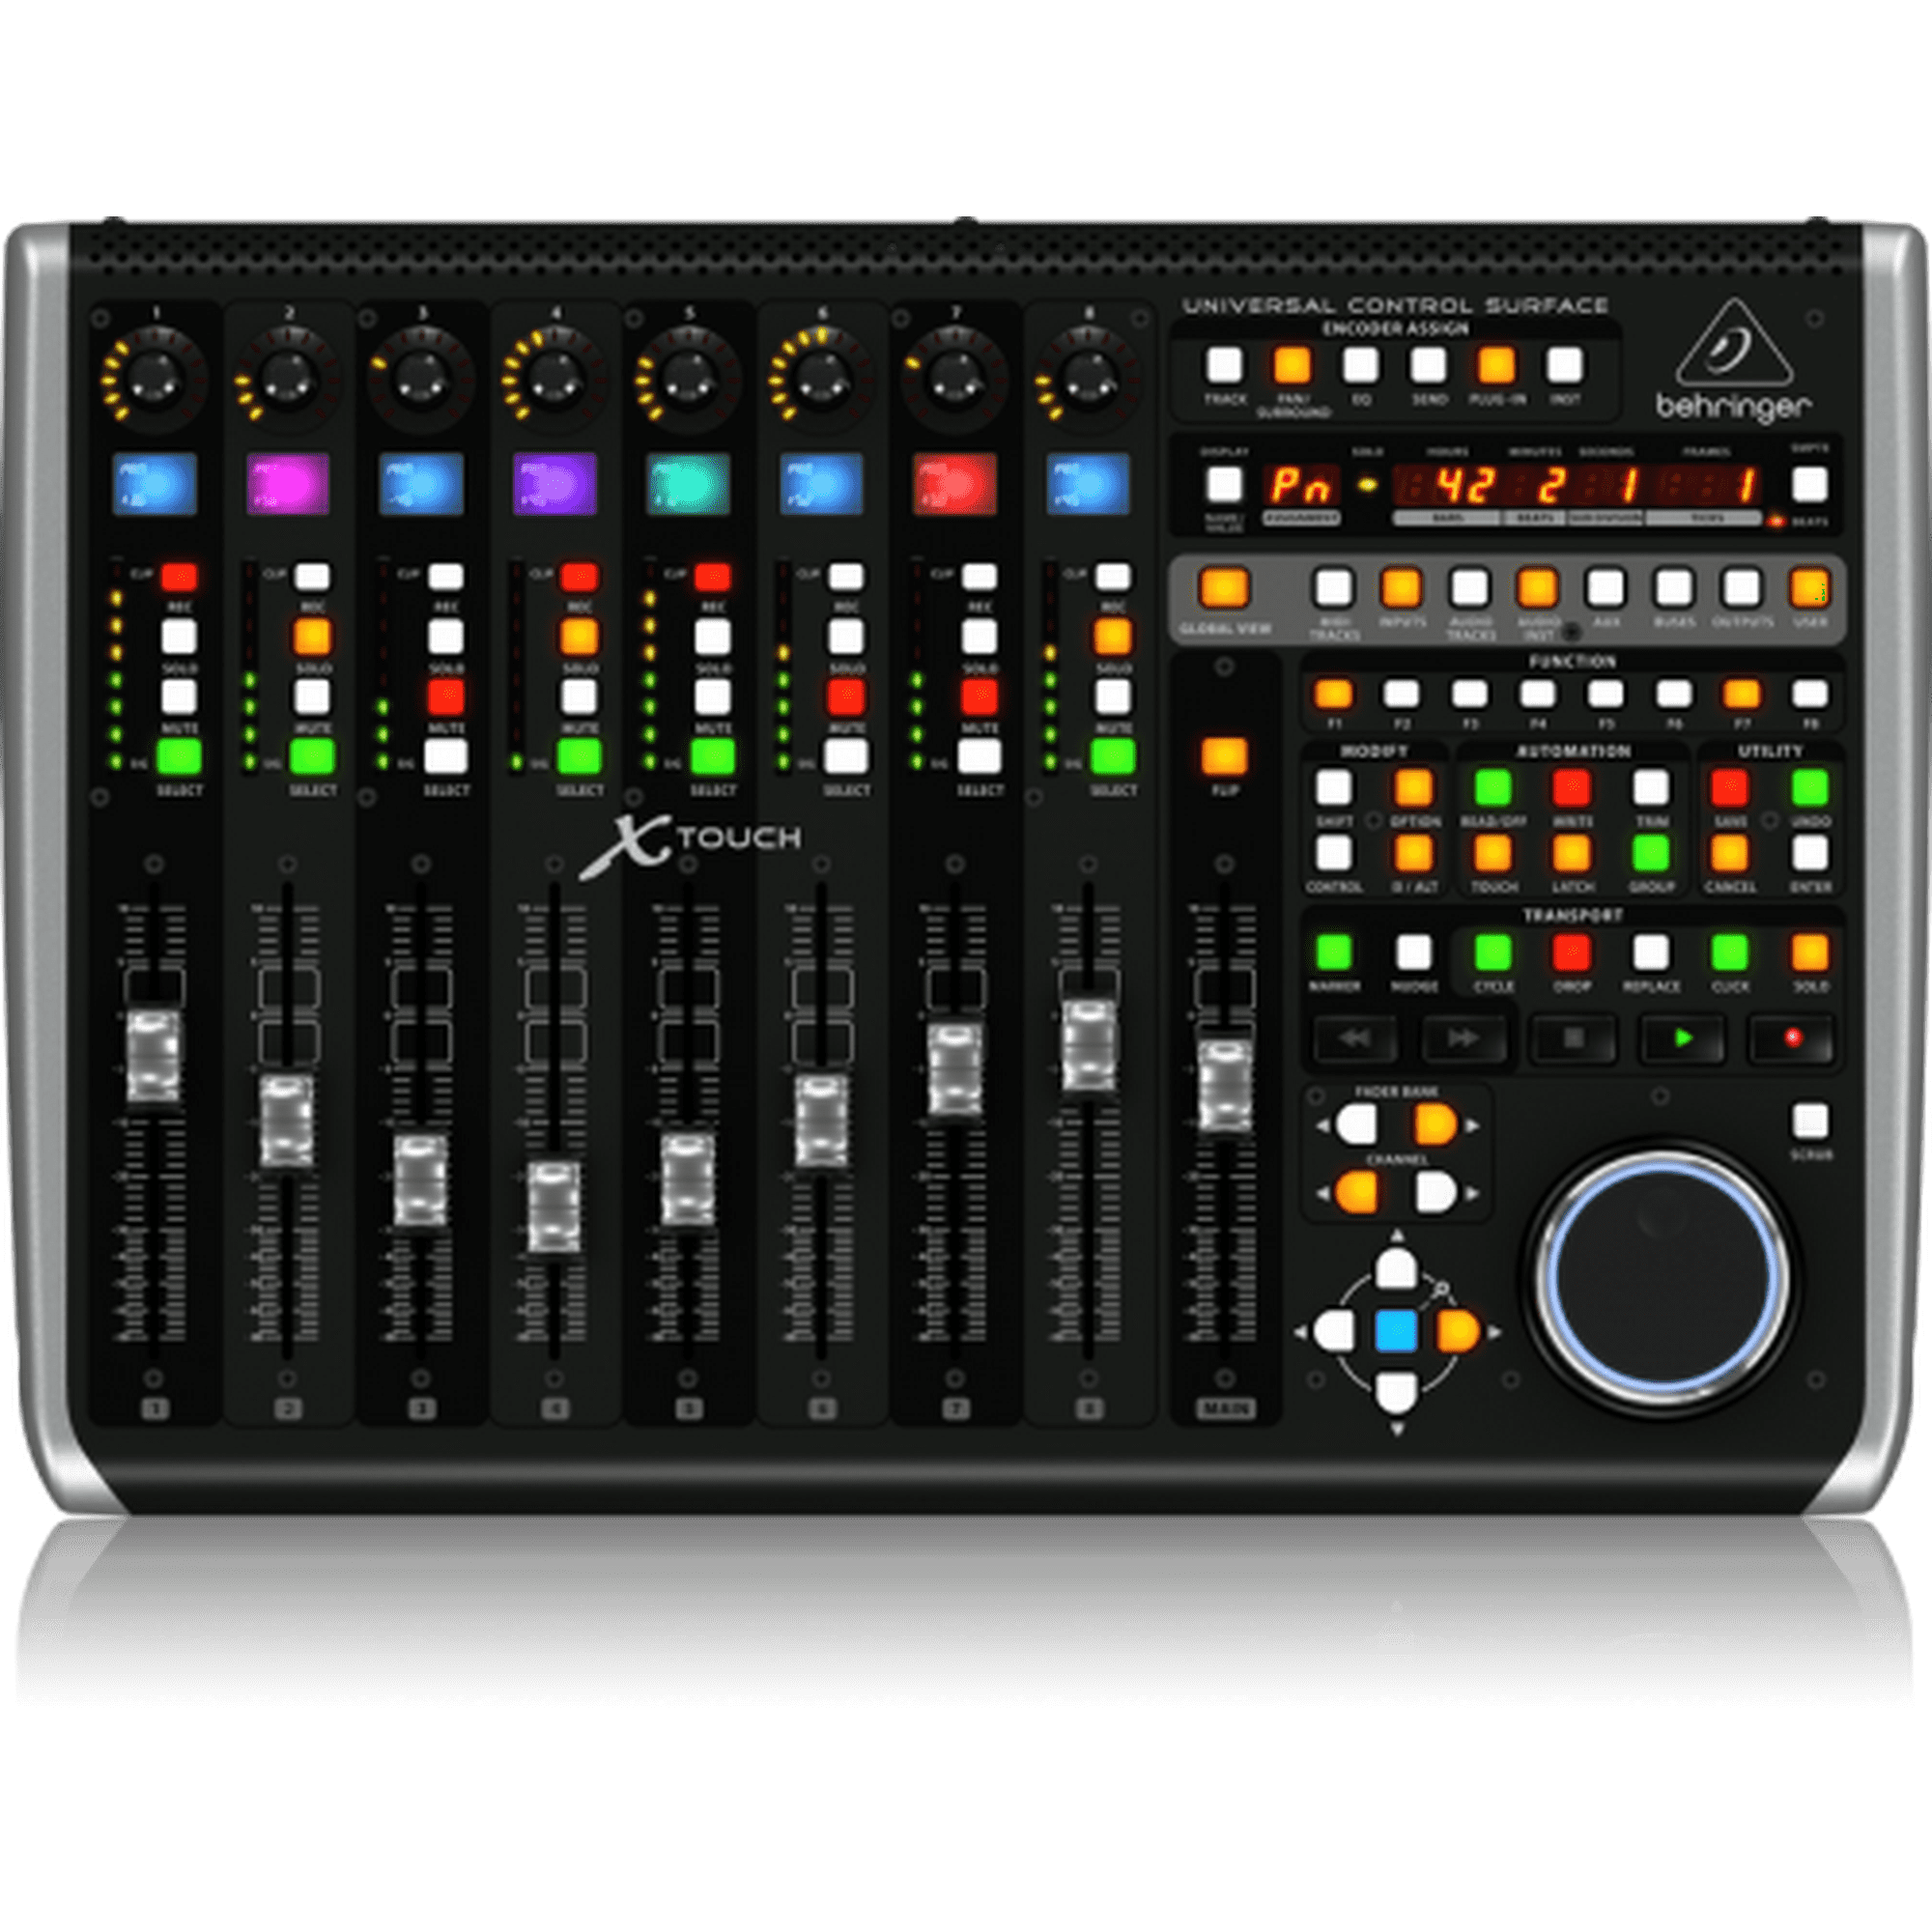 Behringer X-Touch Universal Control Surface | Walmart Canada